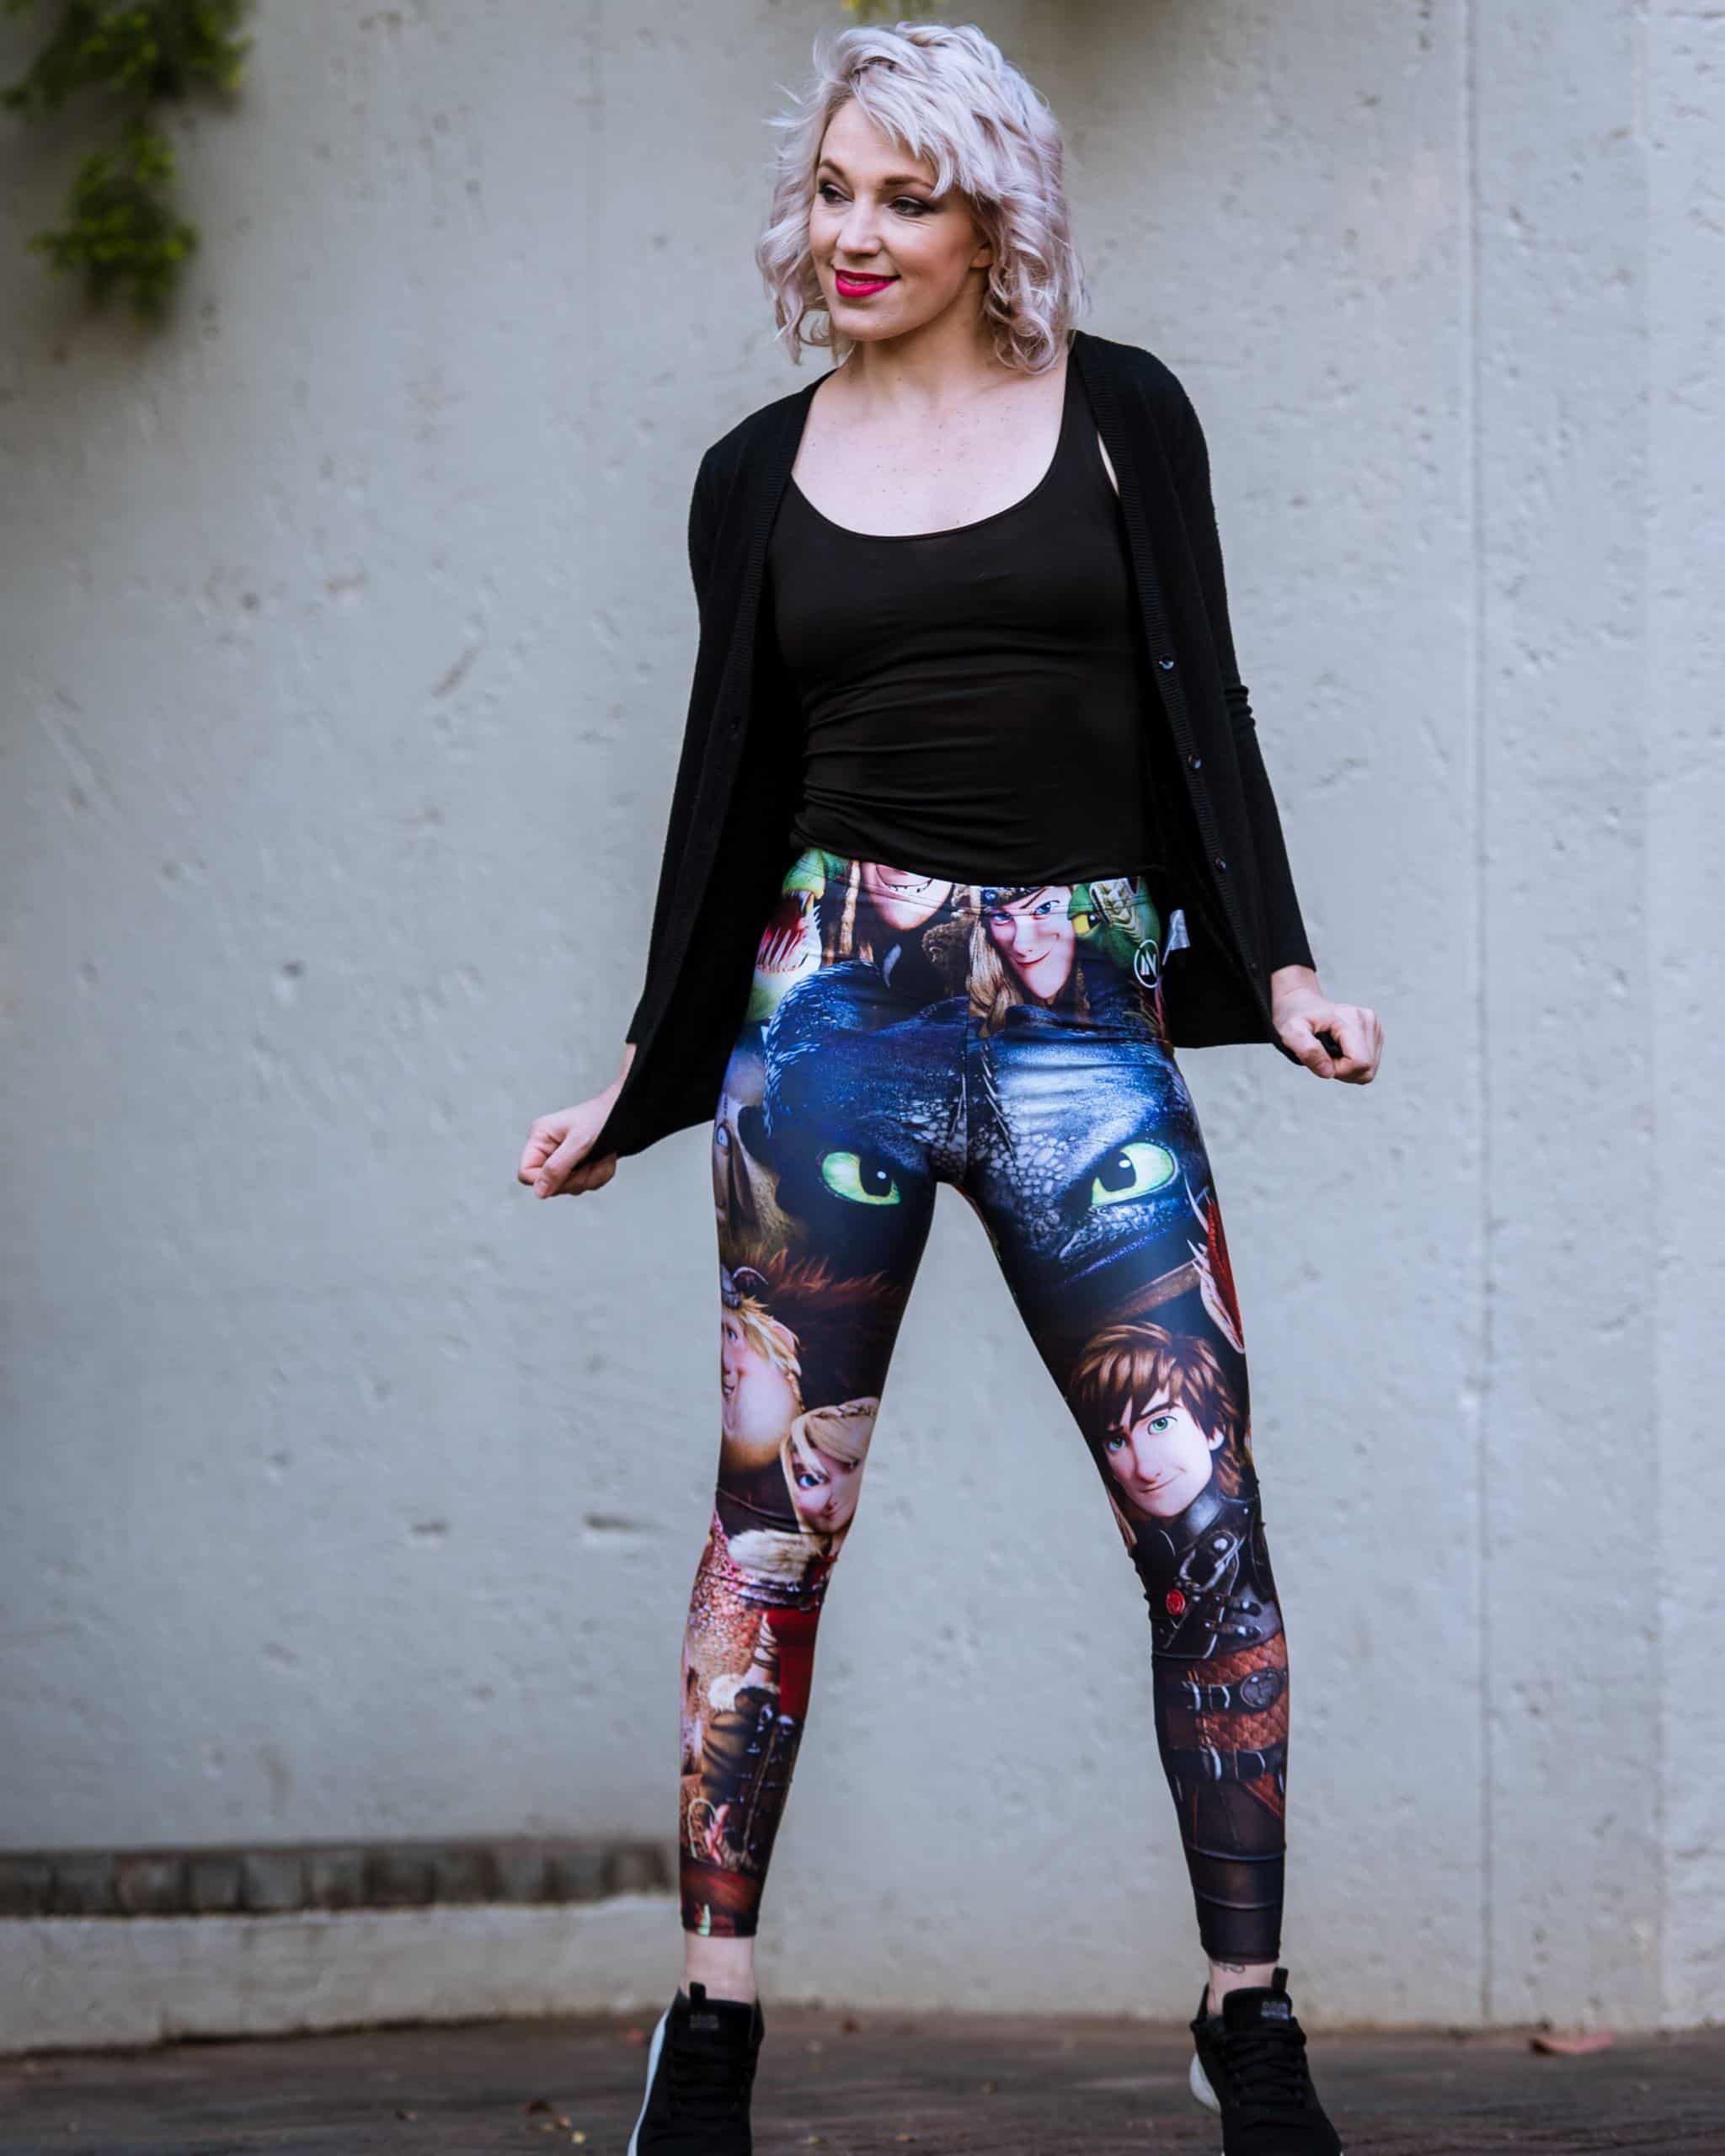 How to Train Your Dragon Leggings – Indelicate Clothing